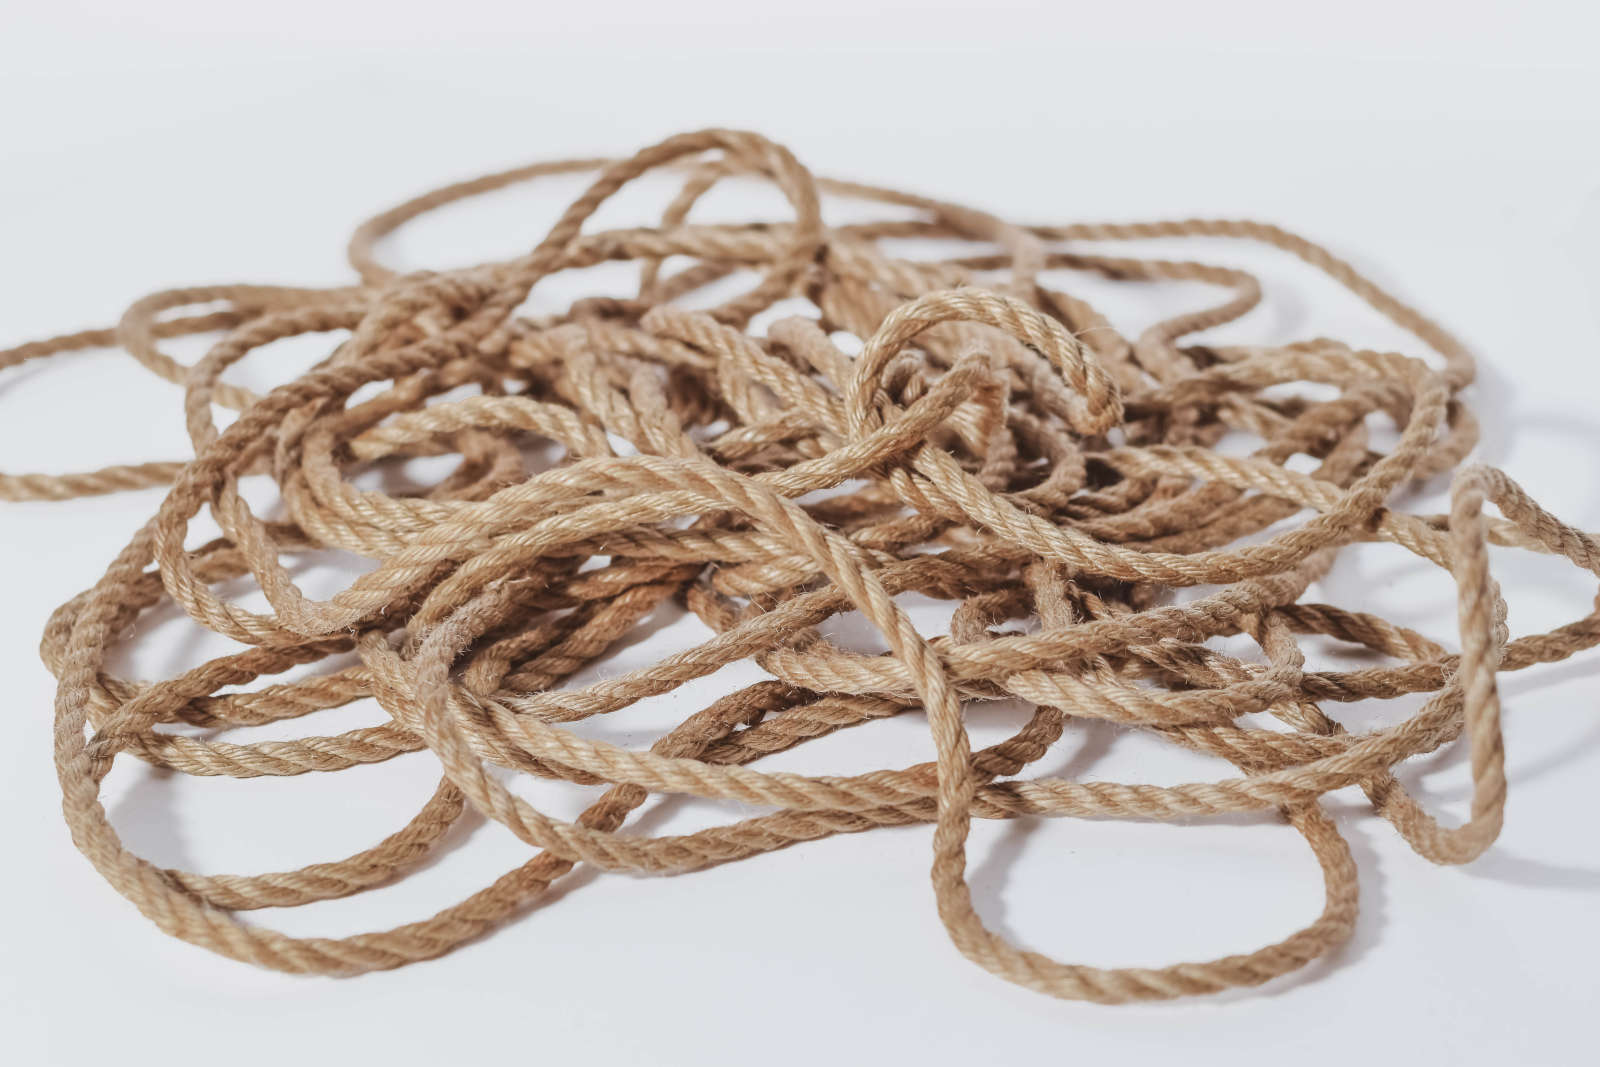 Cotton or jute for shibari? 4 key differences to help you decide